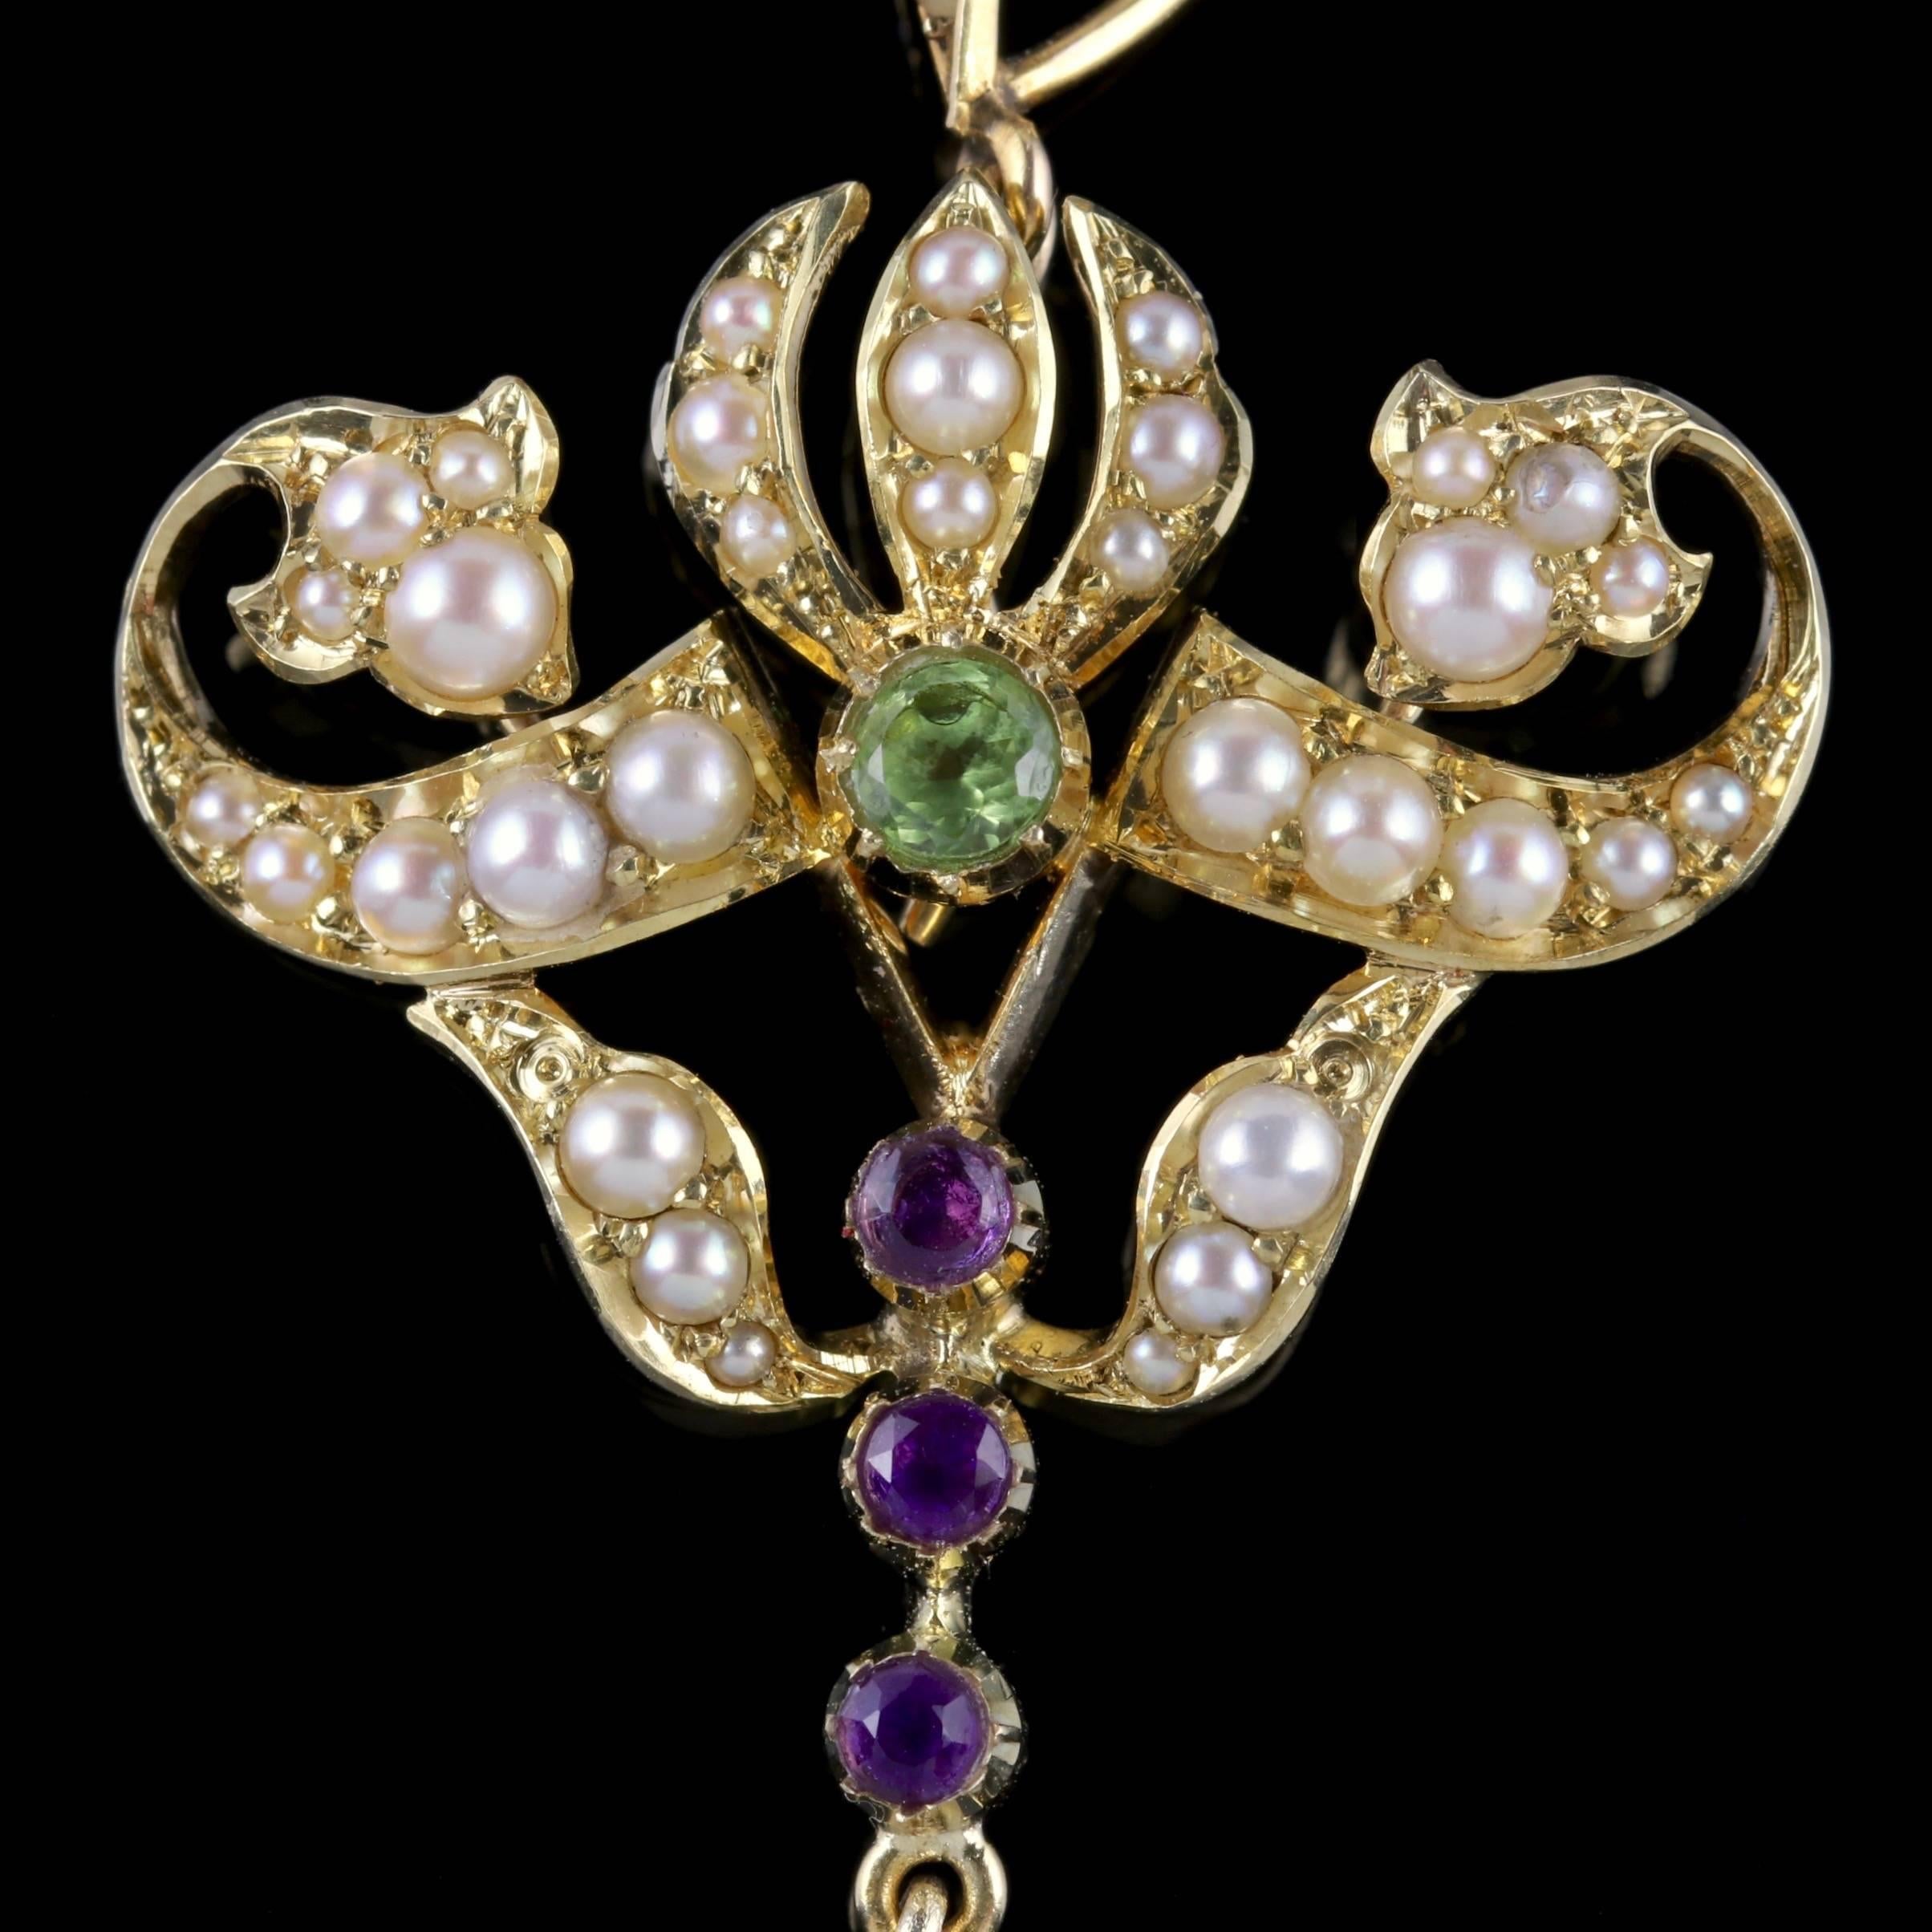 To read more please click continue reading below-

This stunning antique 15ct Gold Victorian pendant was made representing the Suffragette movement, Circa 1900. 

Suffragettes liked to be depicted as feminine, their jewellery popularly consisted of